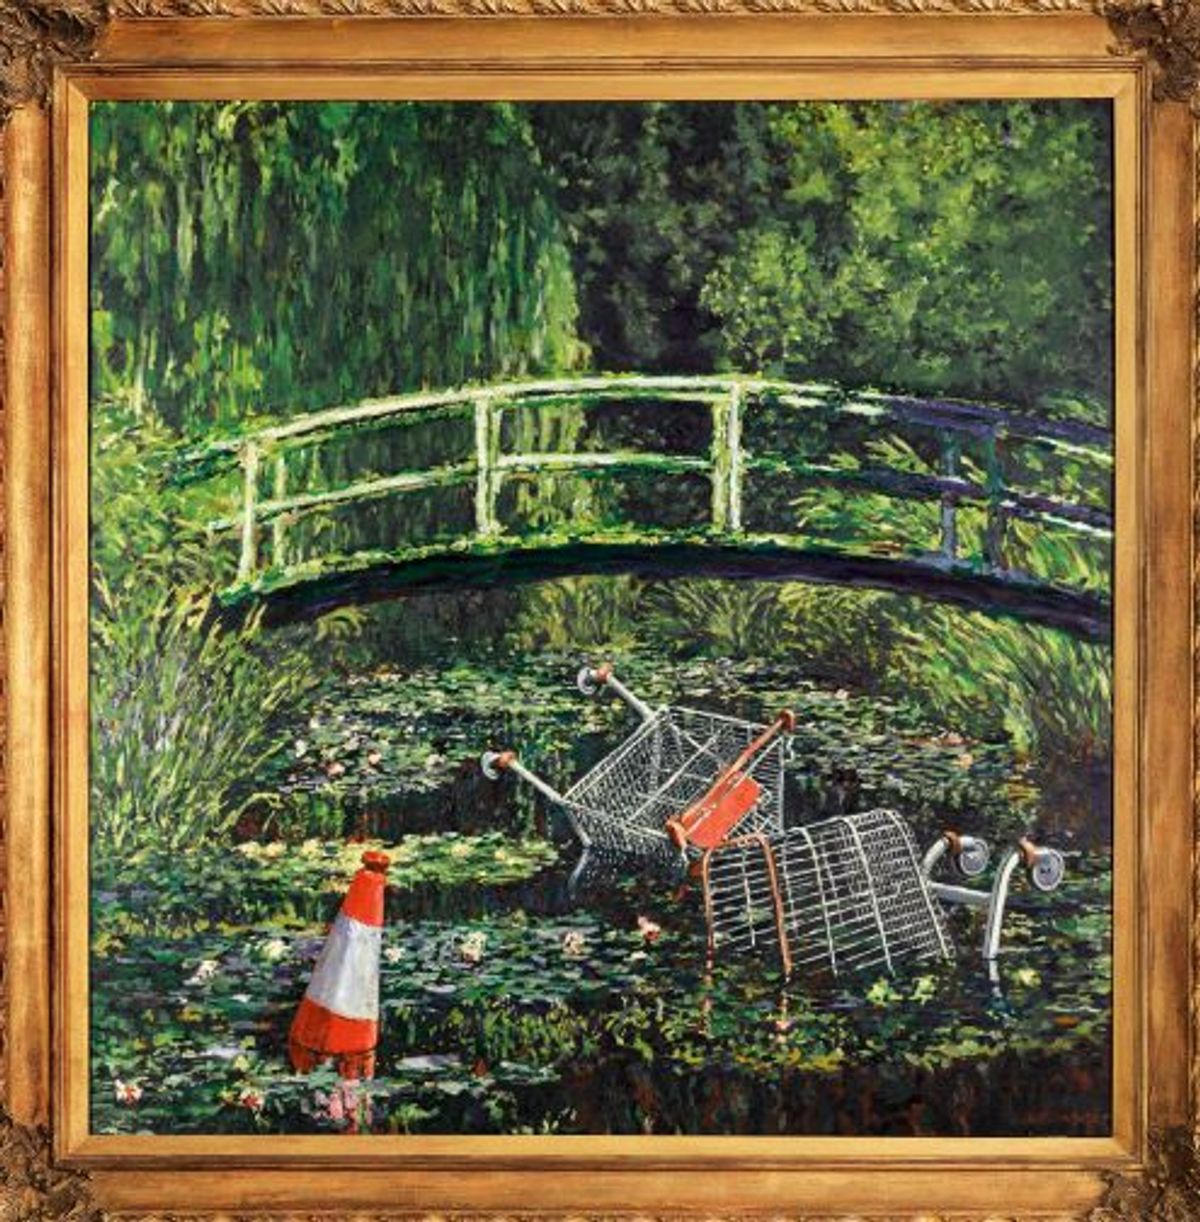 Banksy, Show Me The Monet, 2015. © Sotheby’s